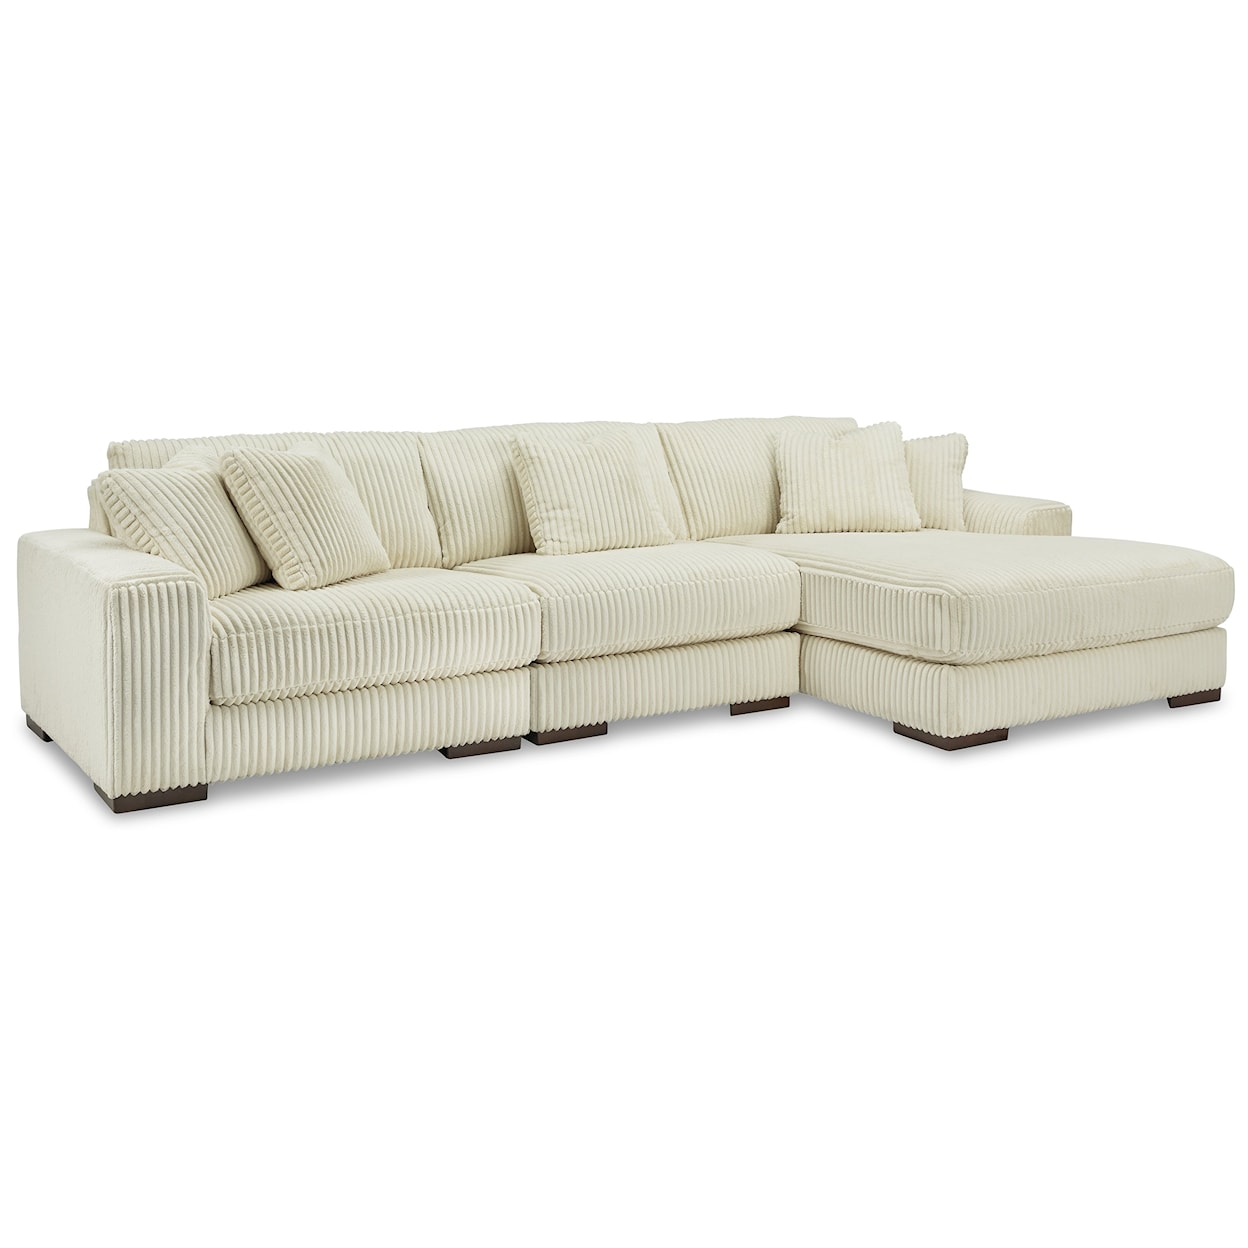 Signature Design by Ashley LONDYN 3-Piece Sectional With Chaise